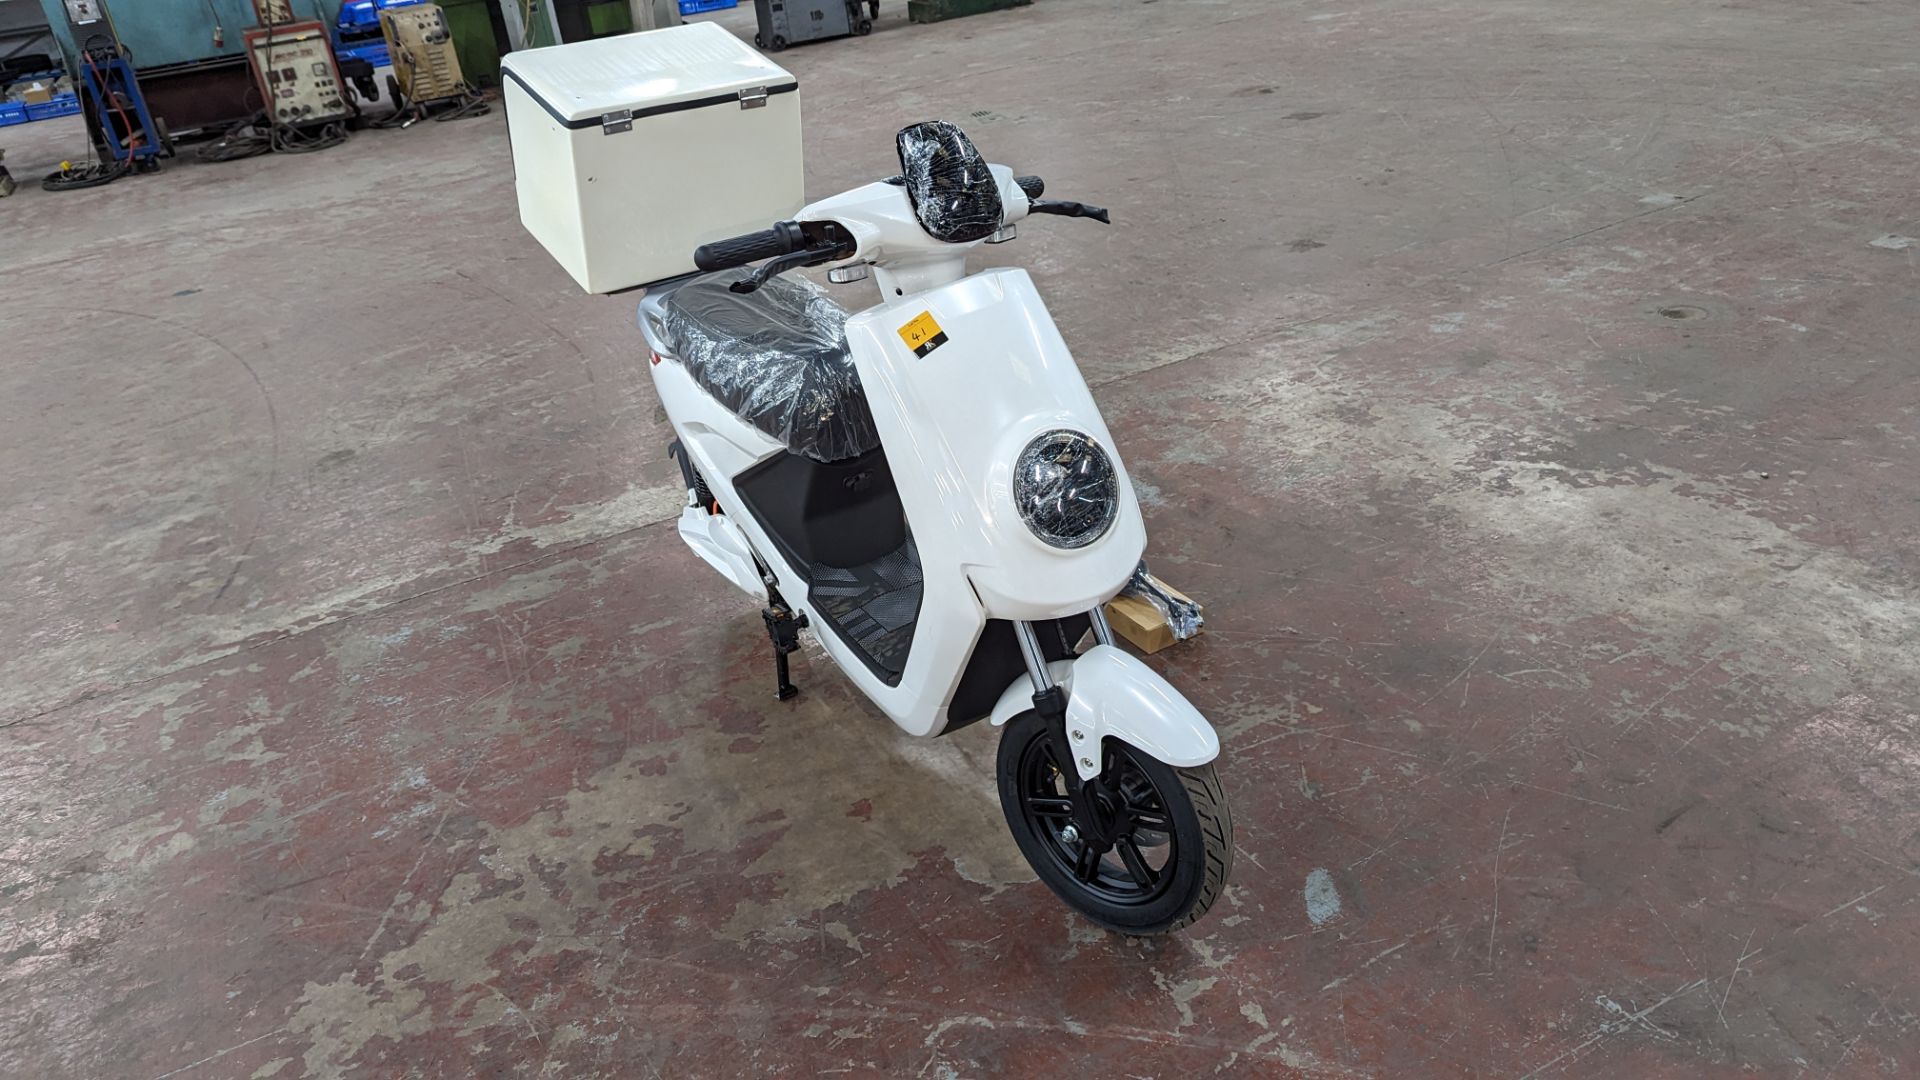 Model 18 Electric Bike: Zero (0) recorded miles, white body with black detailing, insulated box moun - Image 6 of 11